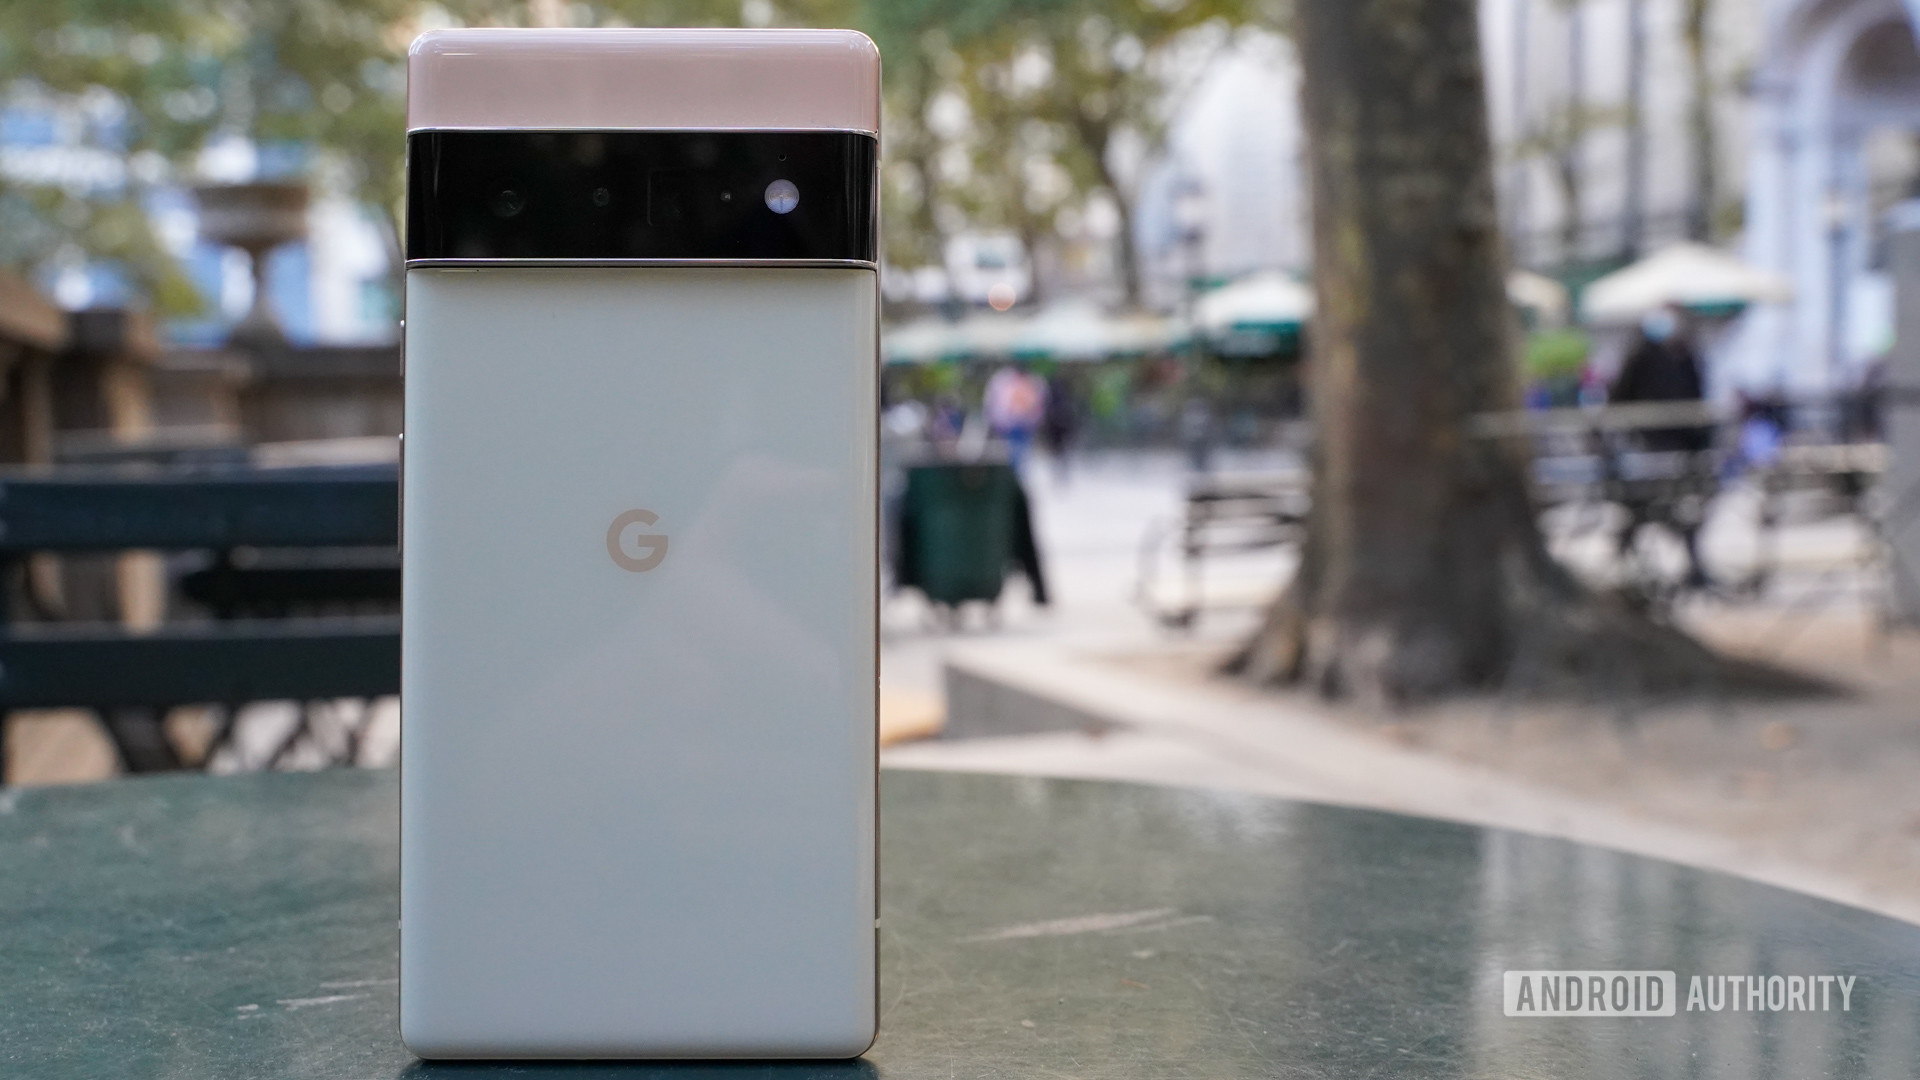 Google Pixel 6 Pro hands-on: Taking the kitchen sink approach